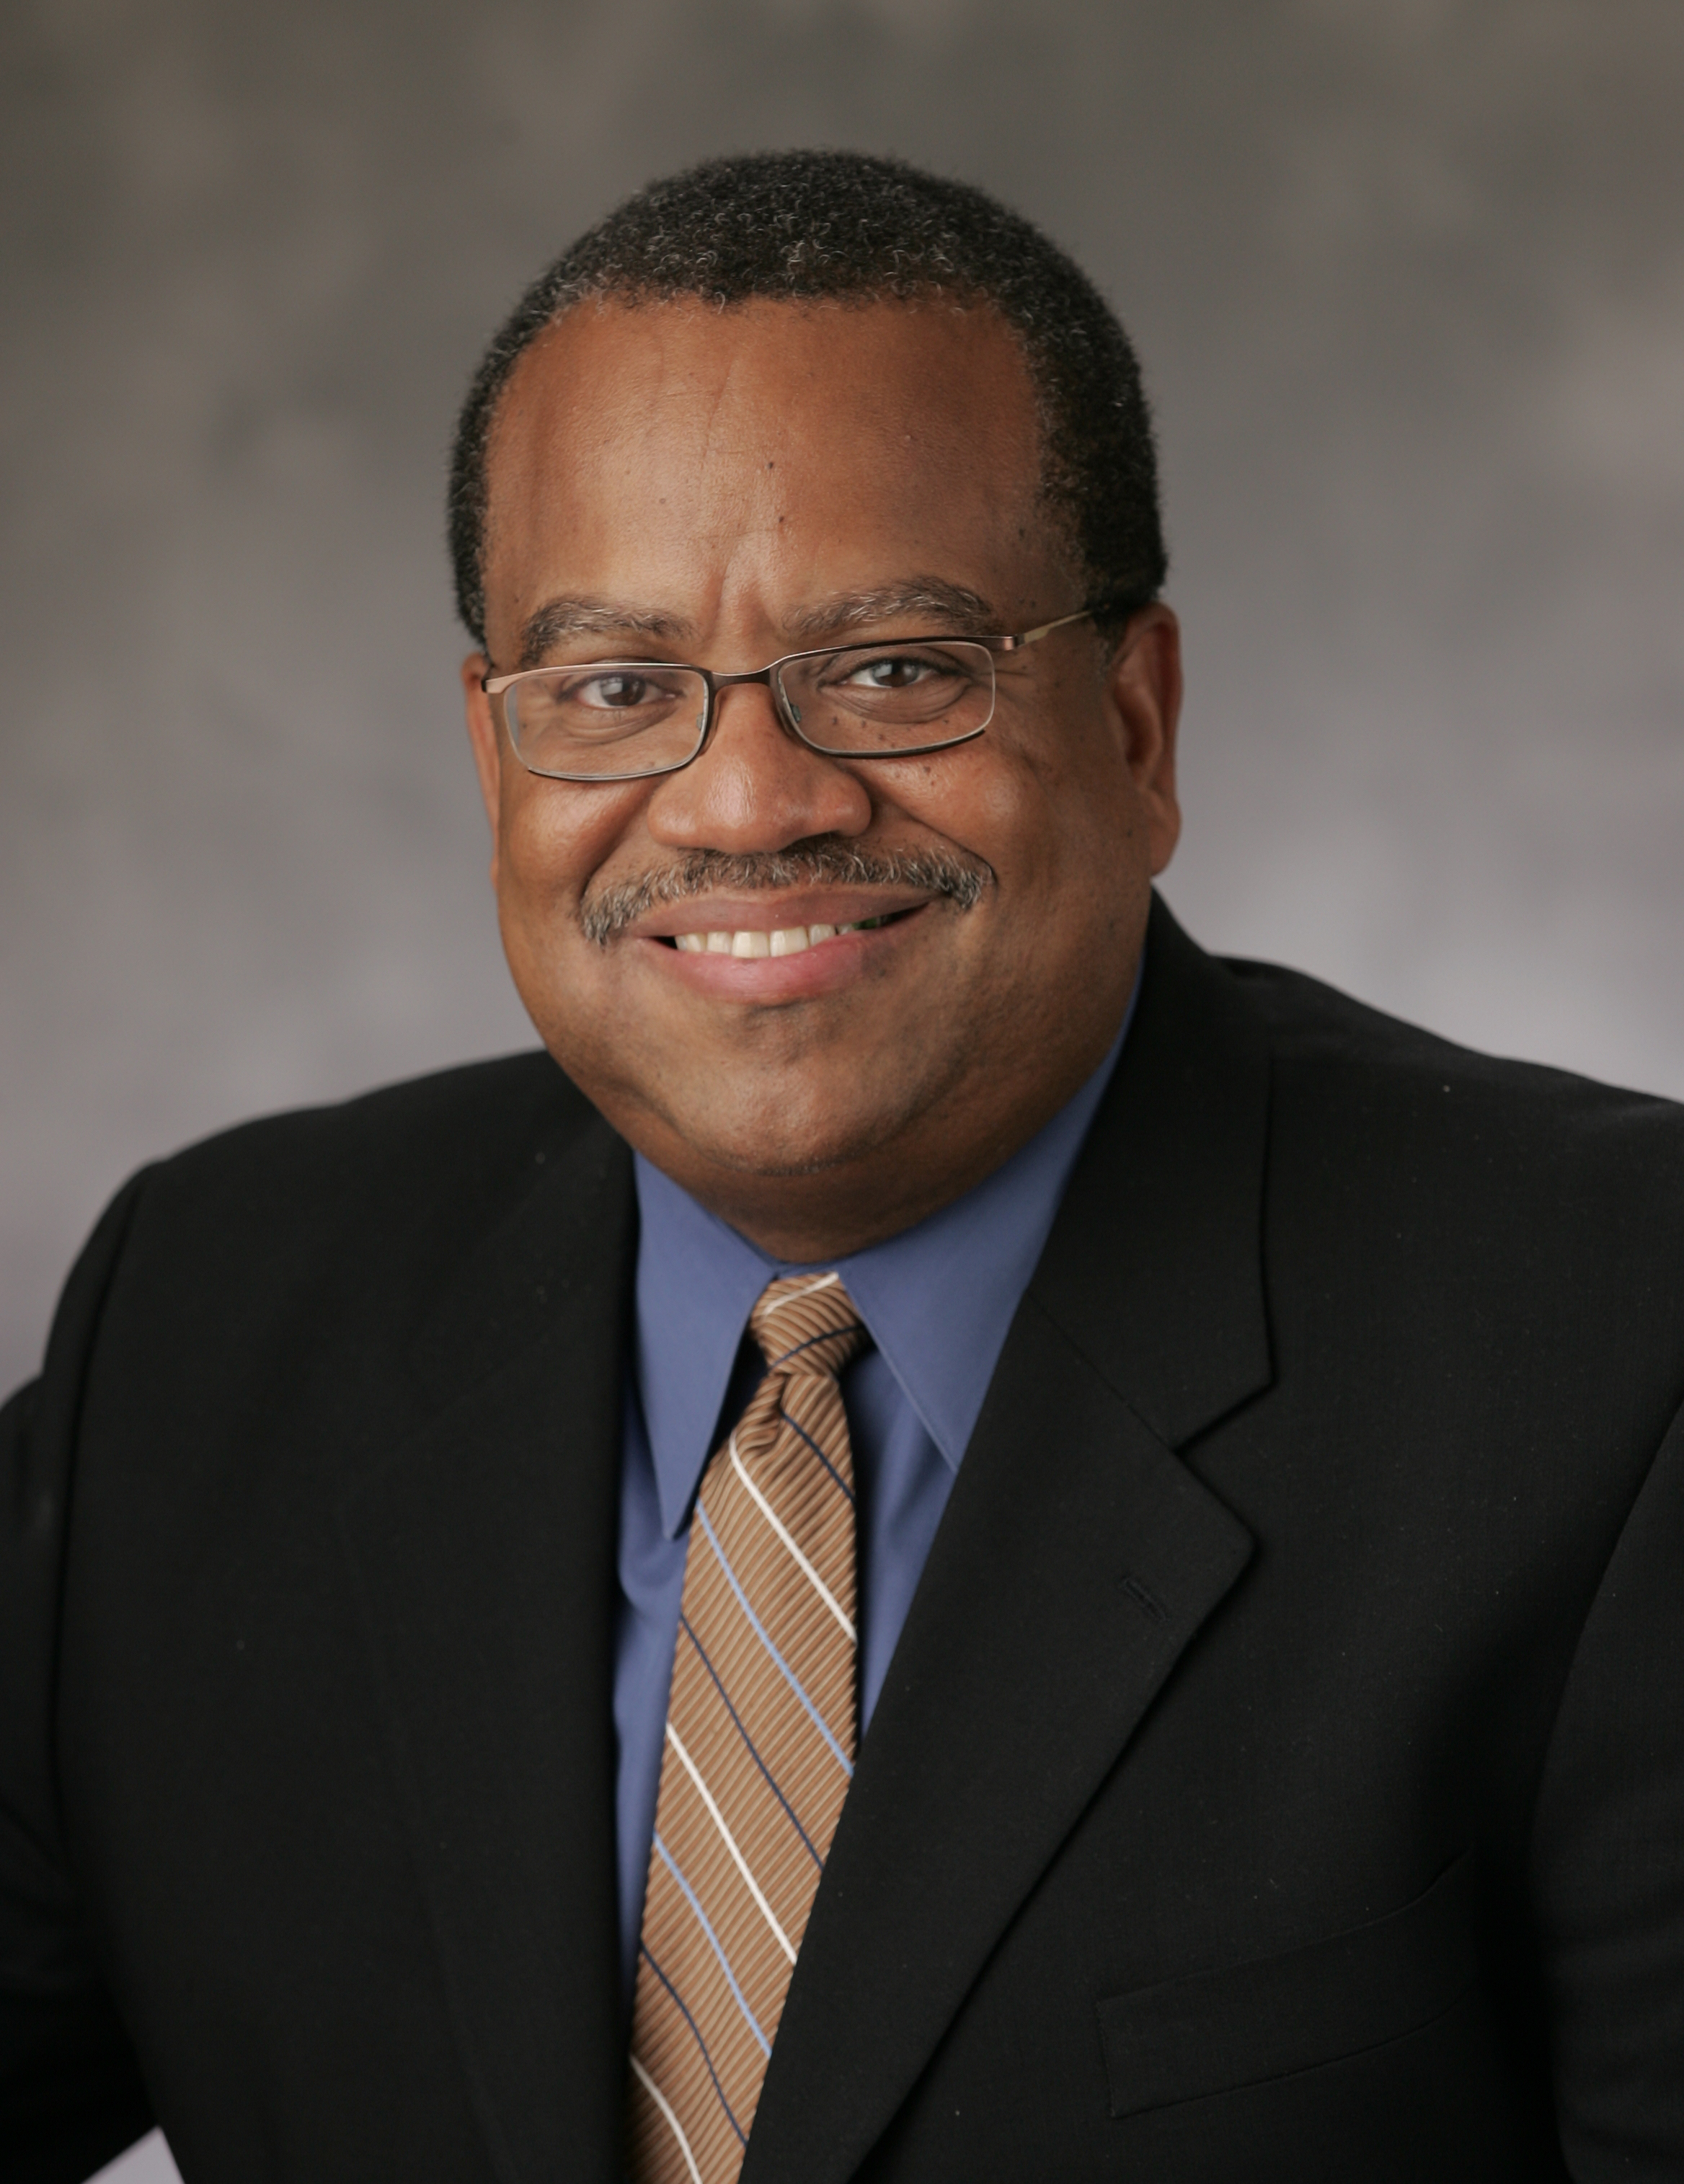 Honoring Excellence: Q and A with Keith D. Carter, MD